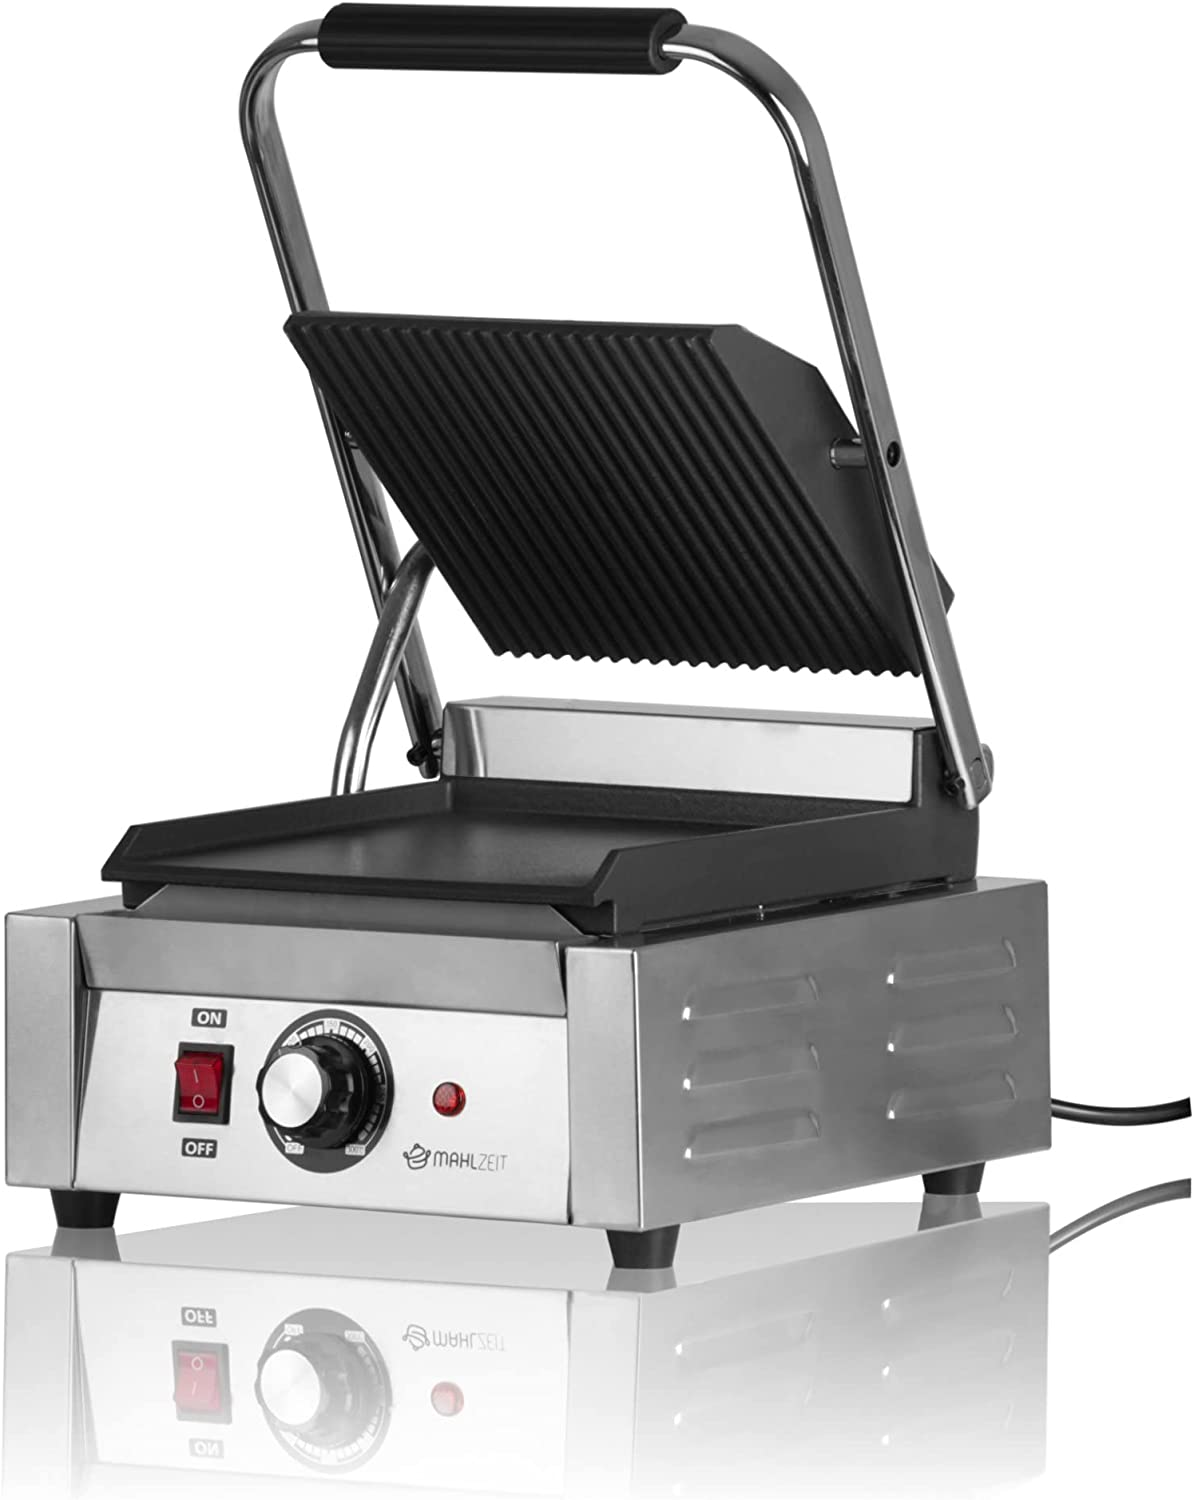 Mahlzeit Electric Contact Grill for Gastro | 1800 Watt up to 300 °C | 31 x 38 x 22.5 cm | Sandwich Grill, Panini Maker, Plate Grill | Sandwich Toaster, Sandwich Maker, Grill Plate for Sandwich